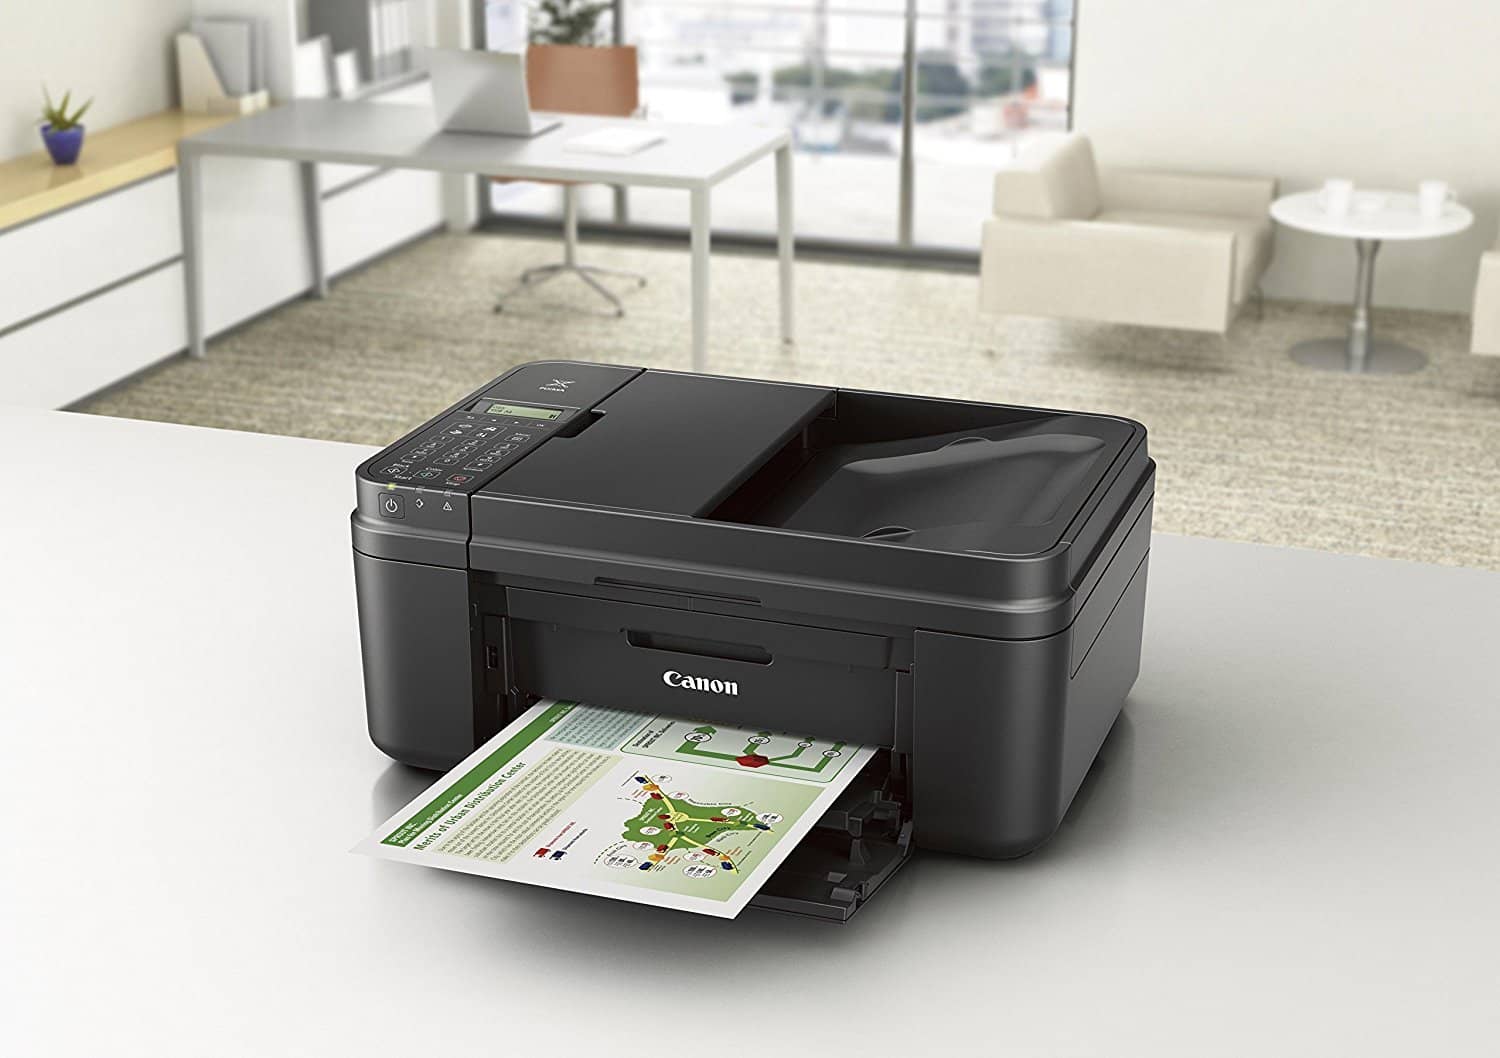 Canon MX492 Wireless All-IN-One Small Printer with Mobile or Tablet Printing